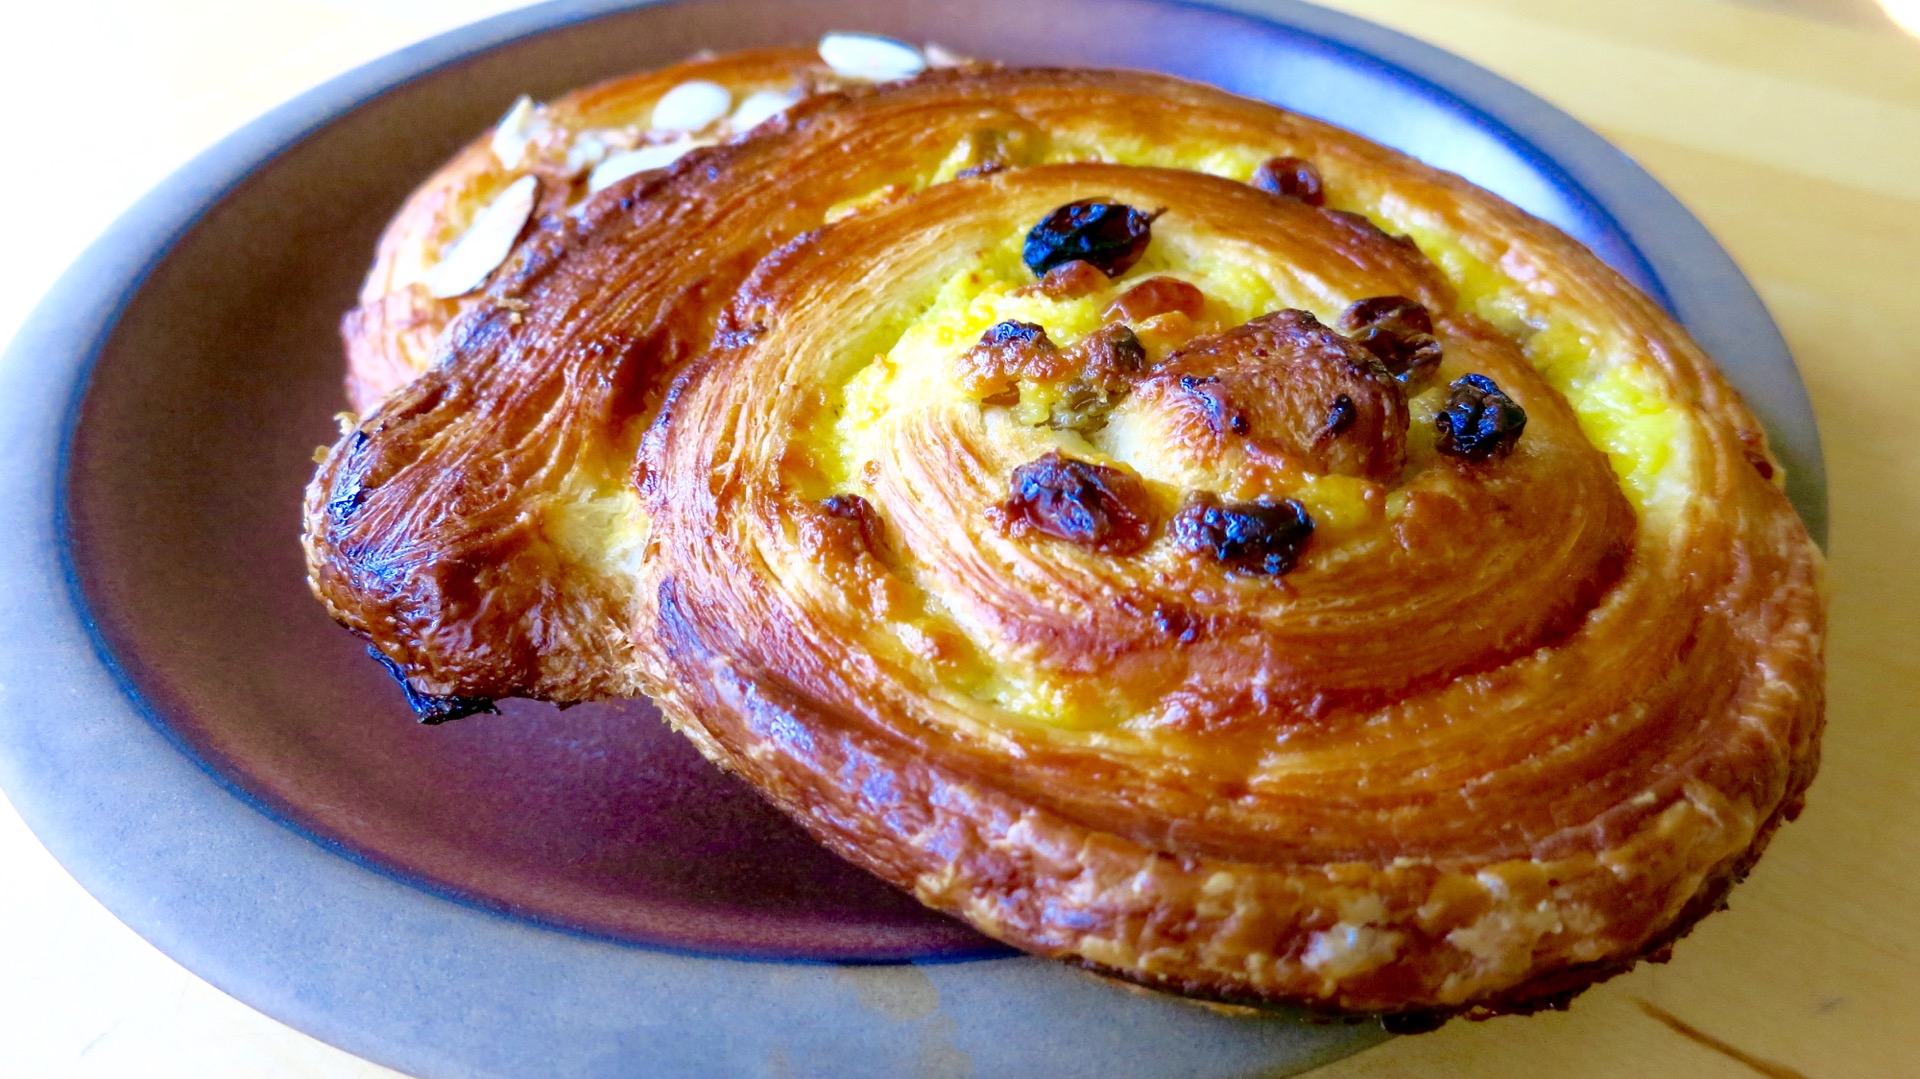 The pain aux raisins (with or without almonds) from Casse-Croûte are a golden brown, butterific treat.